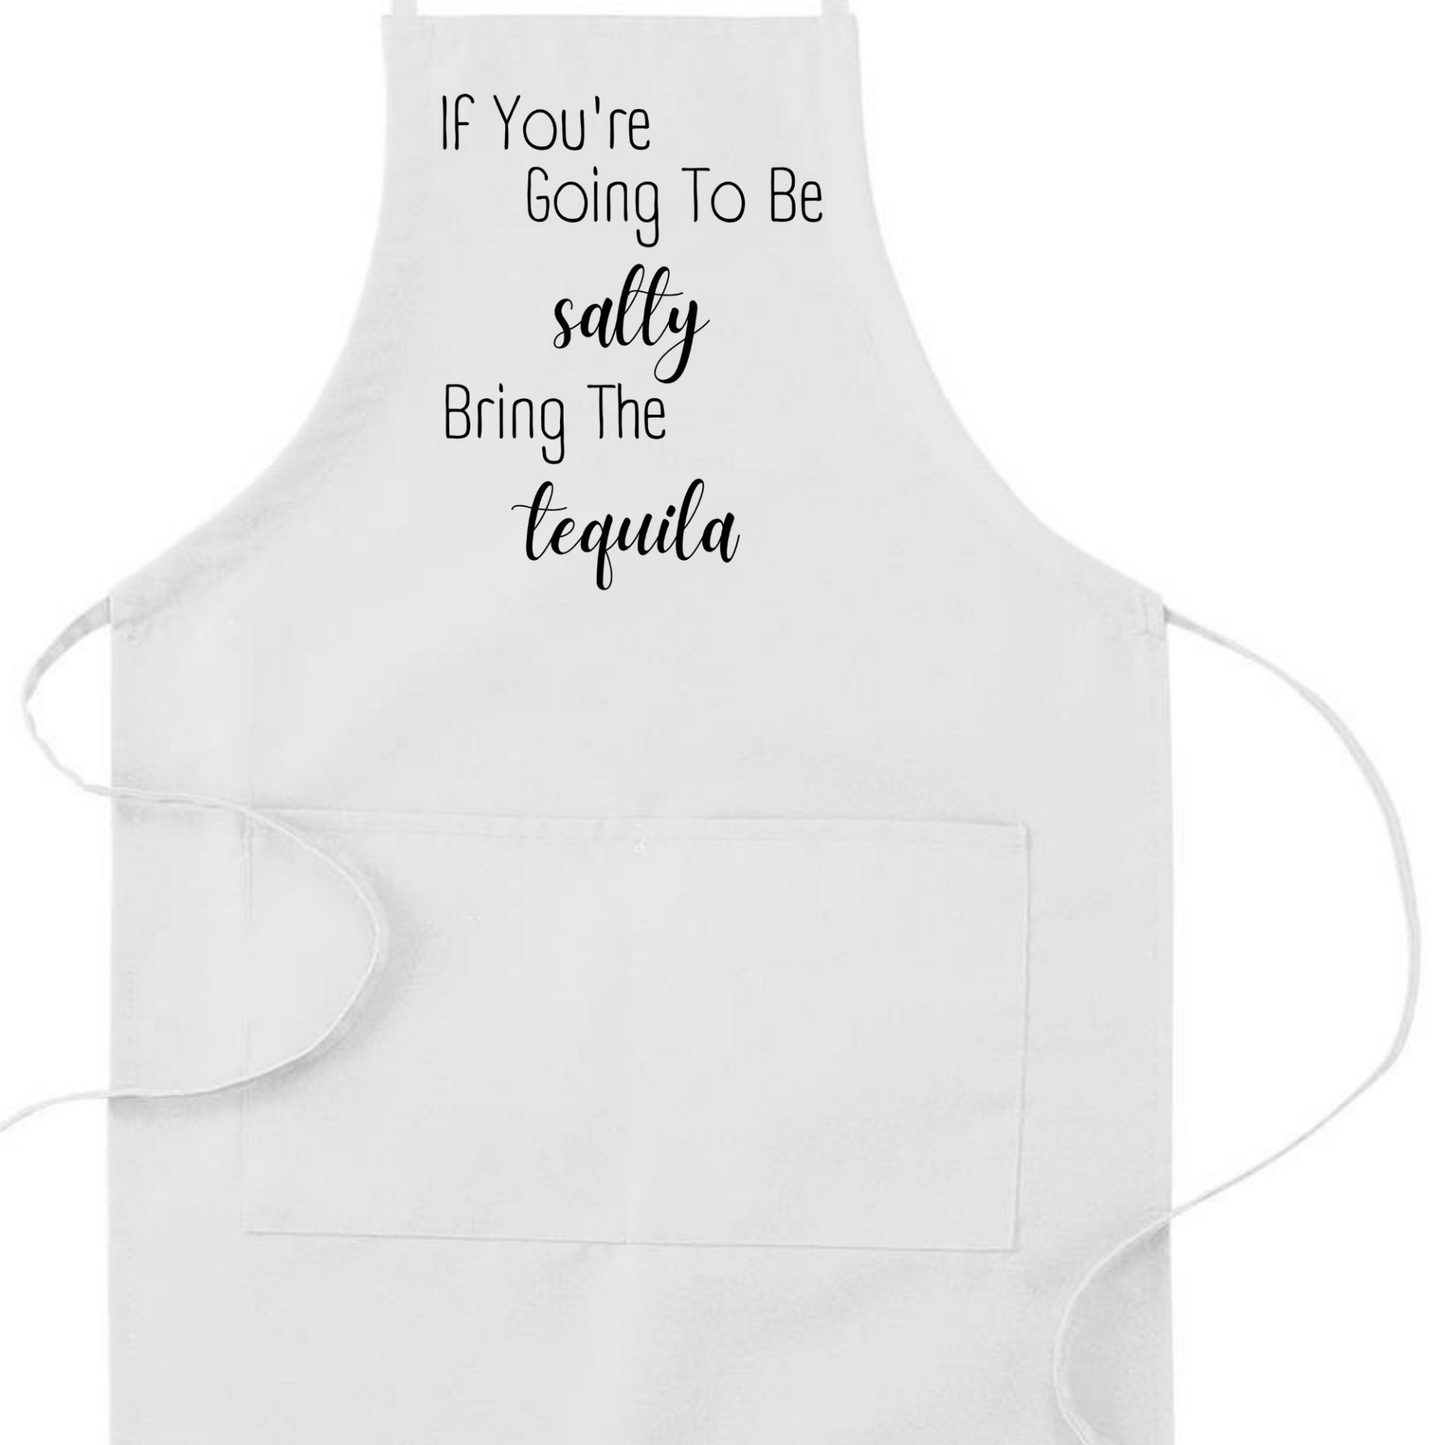 Be Salty Bring the Tequila Humorous Apron | Funny Adjustable Kitchen or BBQ Apron | Perfect Housewarming Gift for Cook or Griller, Goodies N Stuff